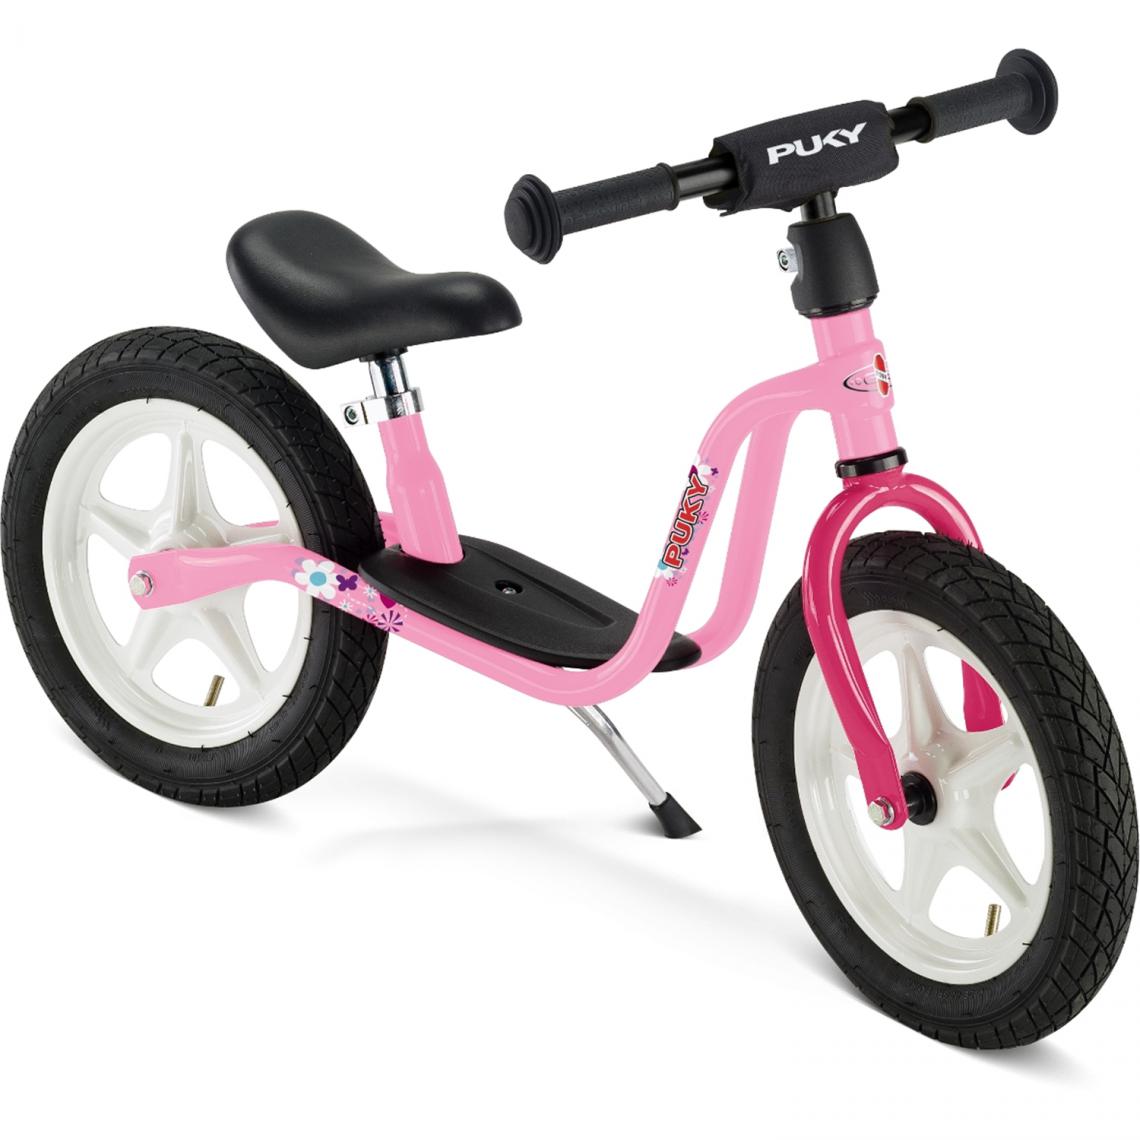 PUKY - Puky 4066 - Draisienne LR1 L rose - Tricycle